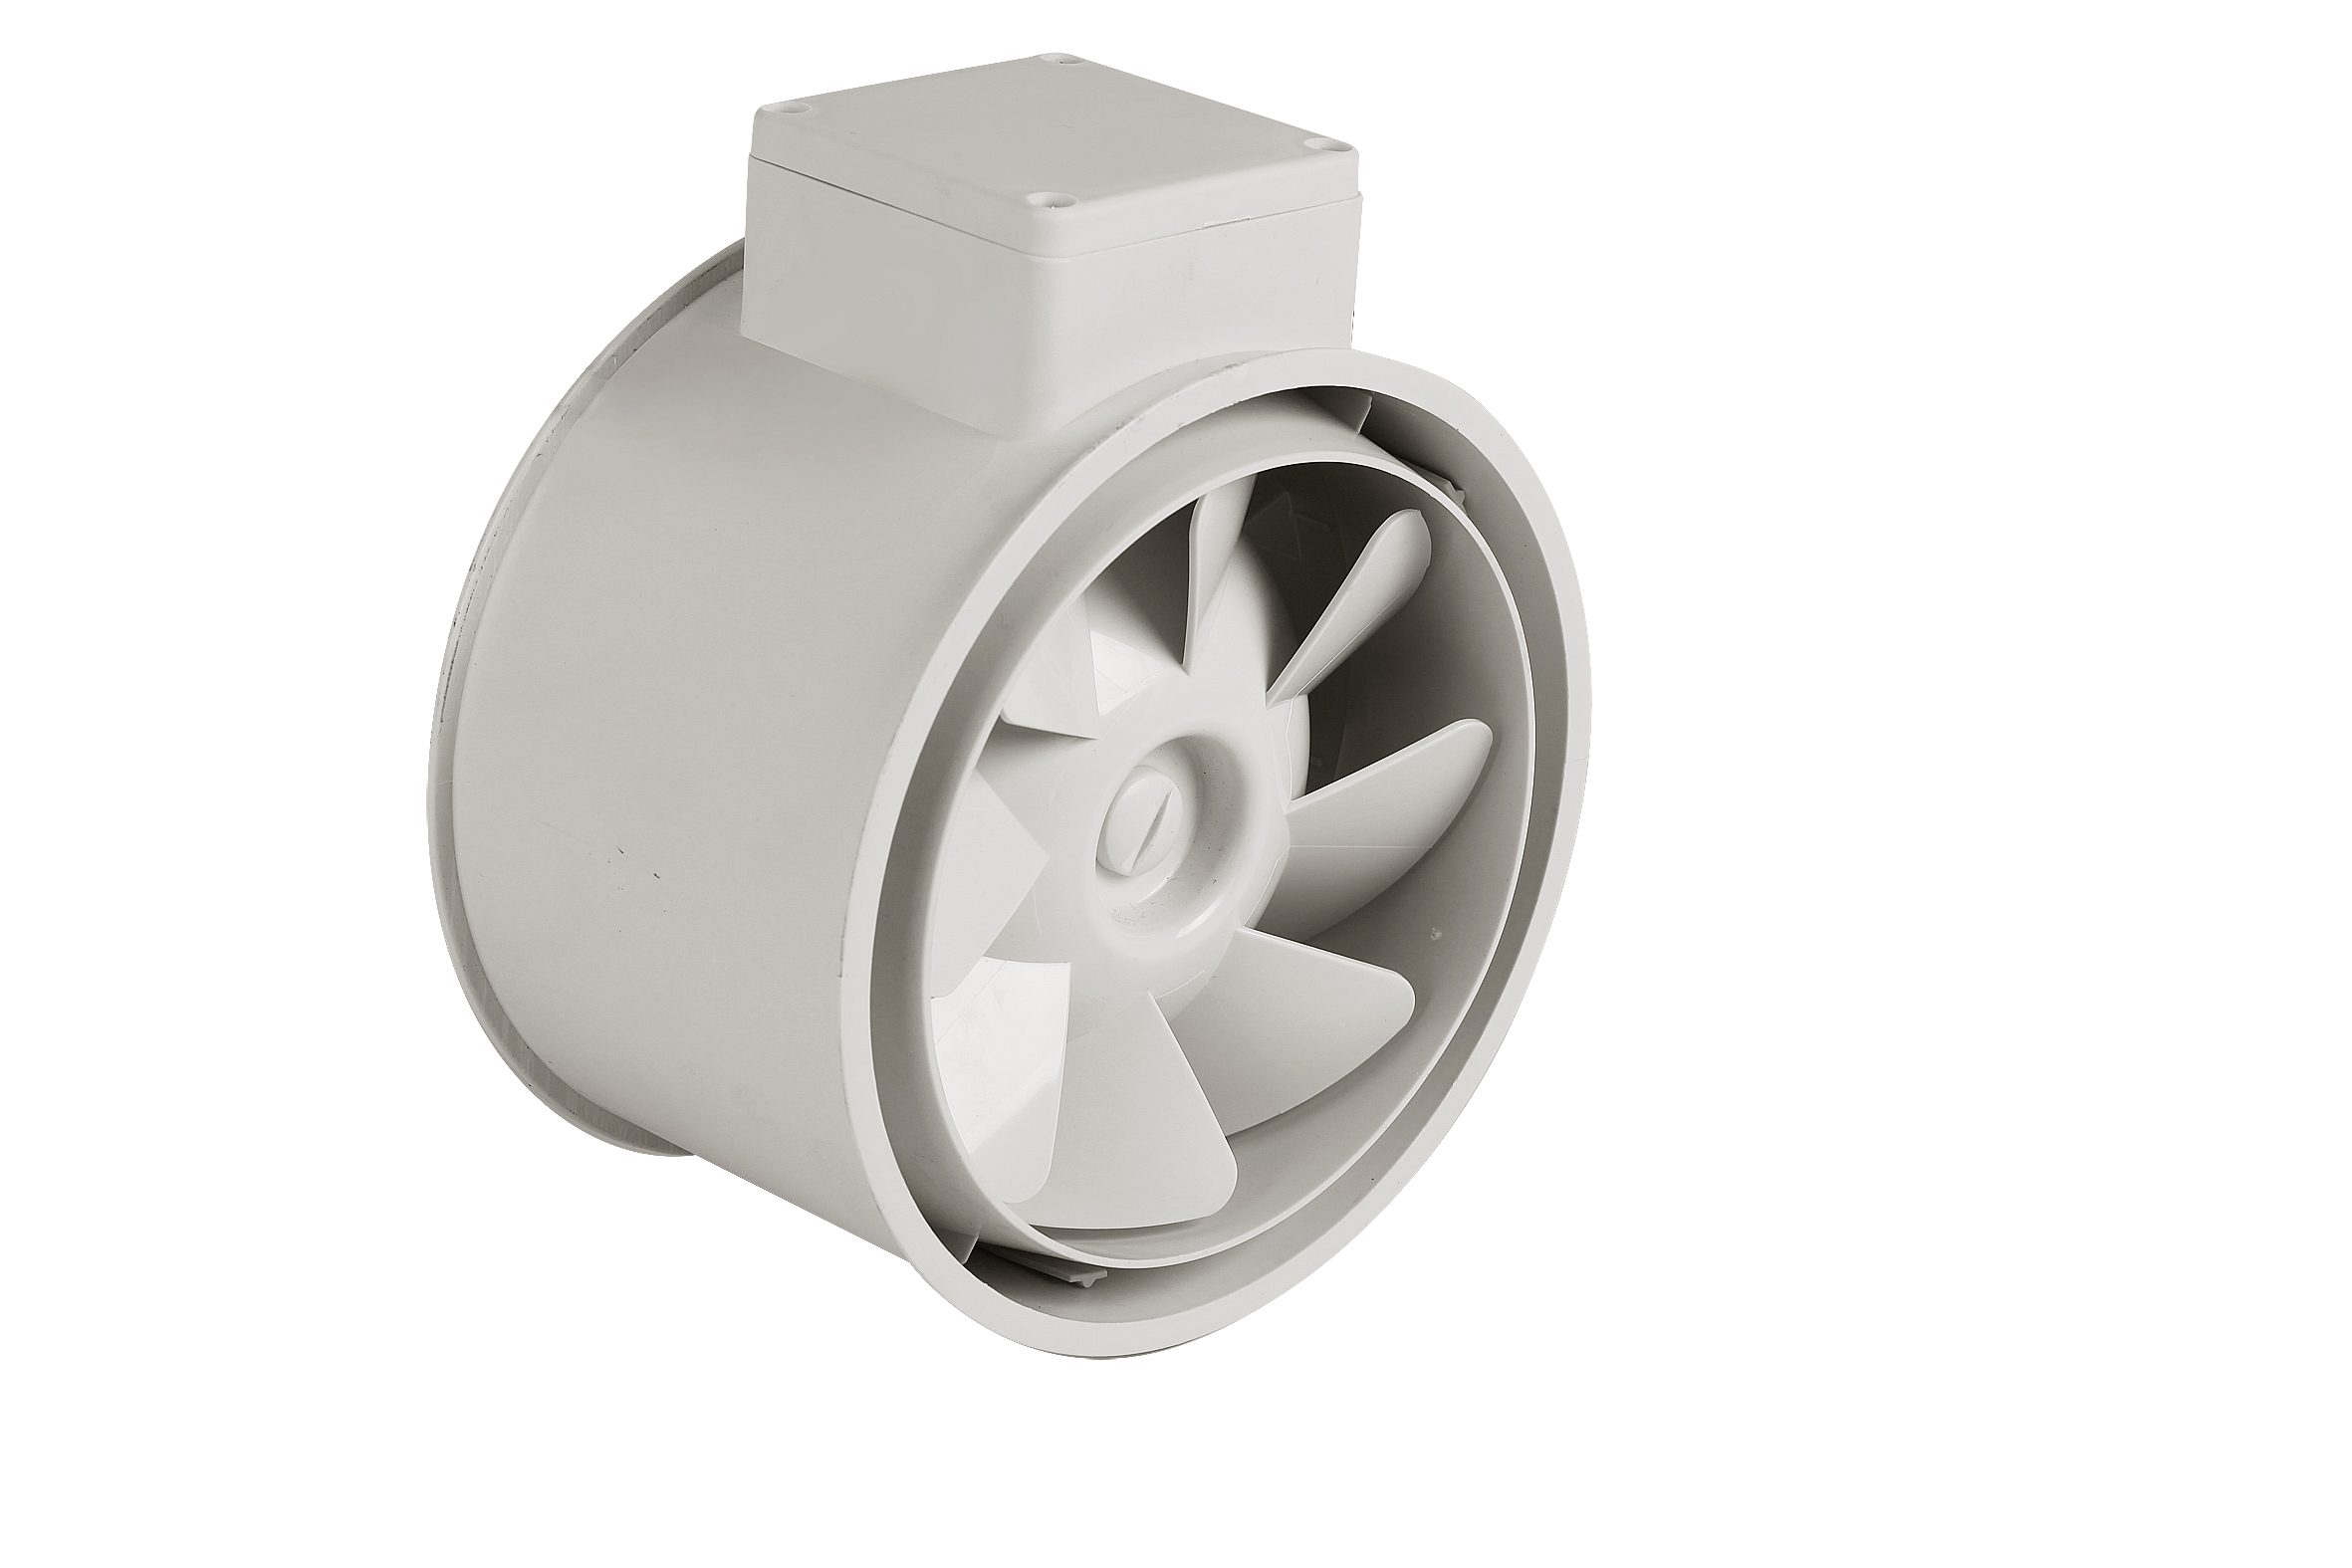 3 Inch Mixed Flow Inline Duct Fan For Agricultural Ventilation (DJT75UM-25P)